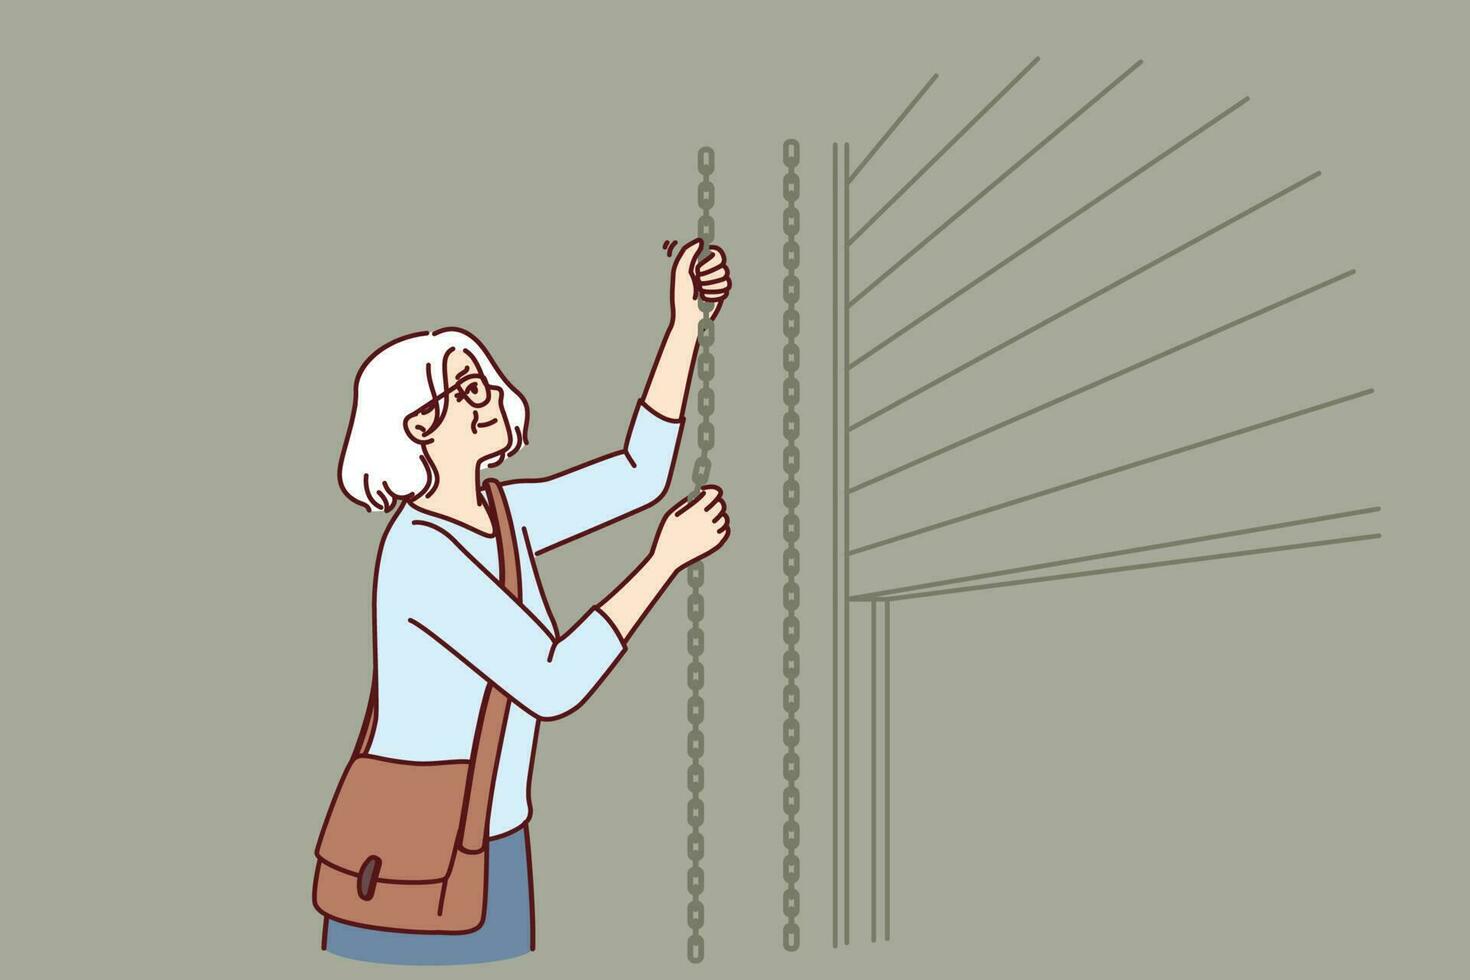 Elderly woman closes shop to store after end of working hours and departure of customers from store or cafe. Grey-haired female small business owner ends working day by closing doors to trading floor vector